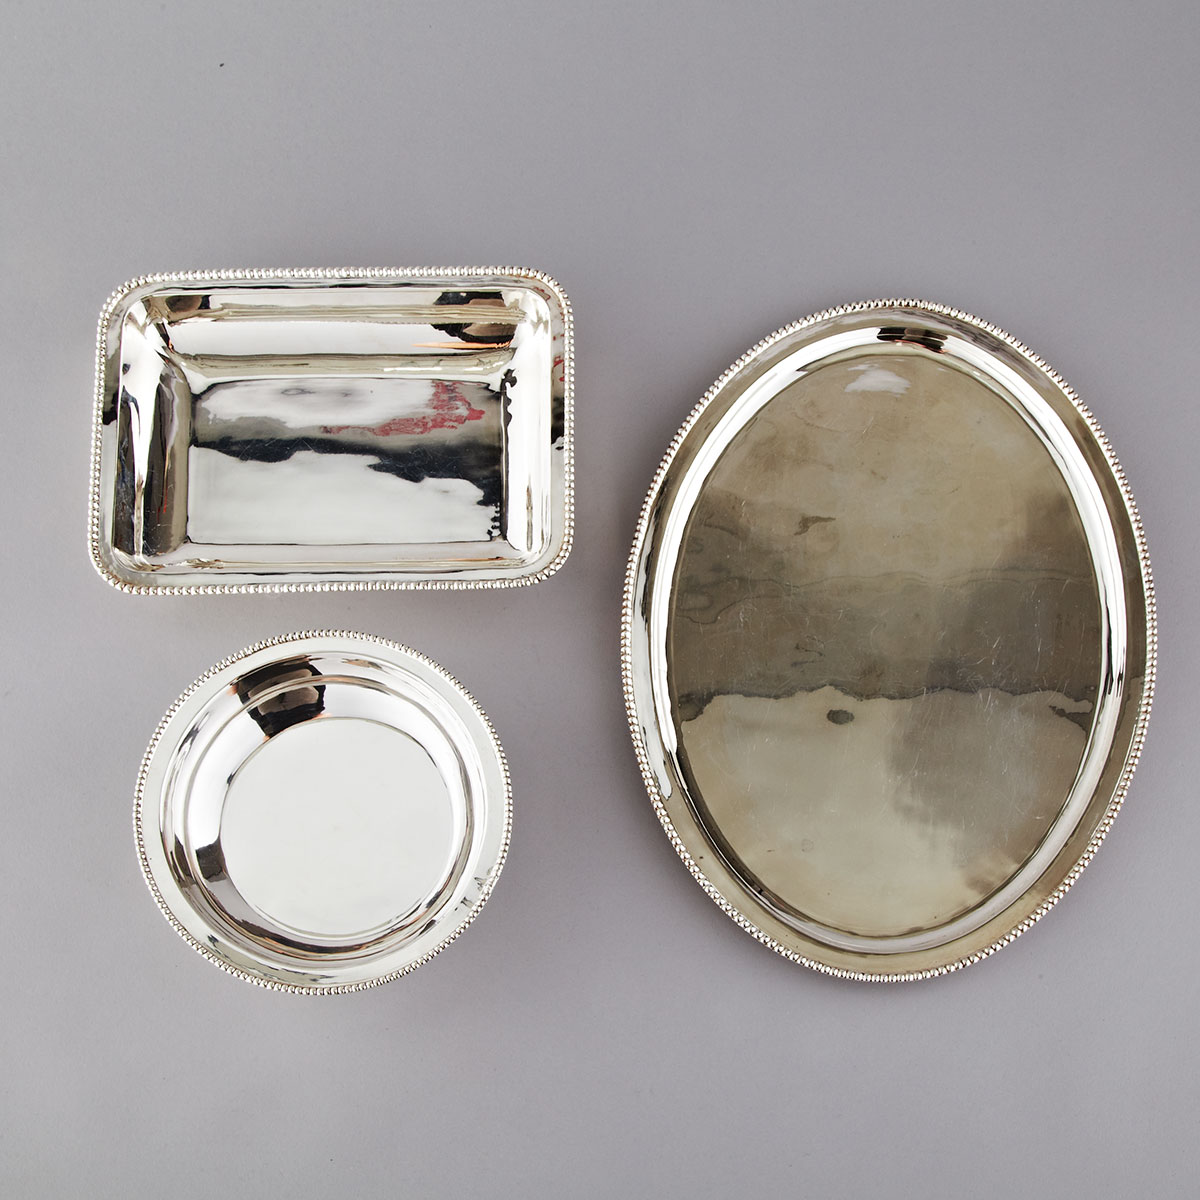 Indian Silver Oval Tray and Two Serving Dishes, 20th century